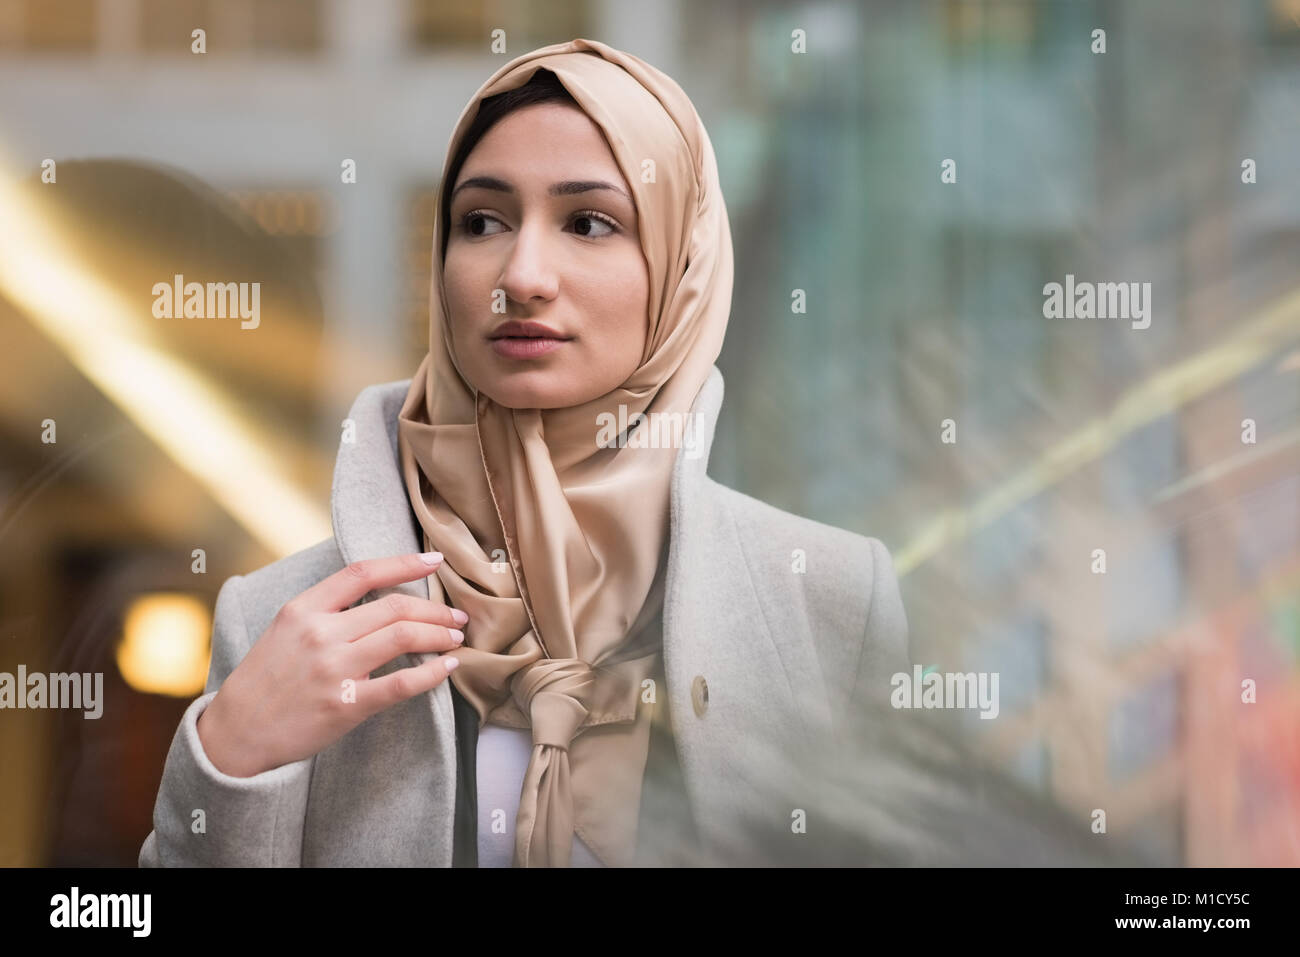 Young woman in hijab Stock Photo